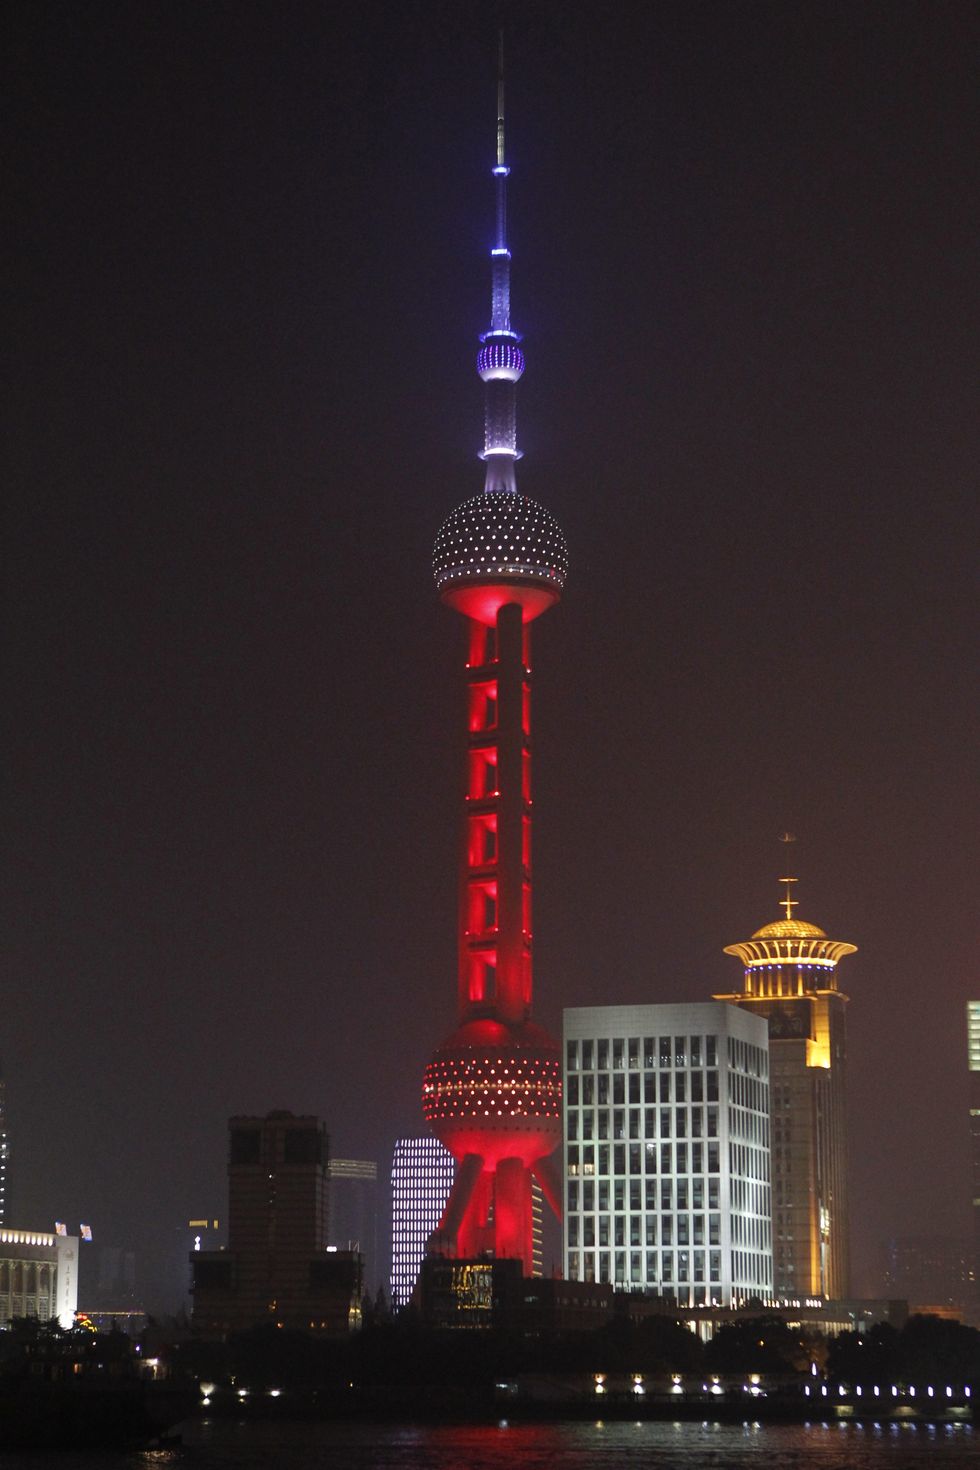 Photos of the world's solidarity following the Paris attacks - Oriental Pearl Tower, Shanghai, China